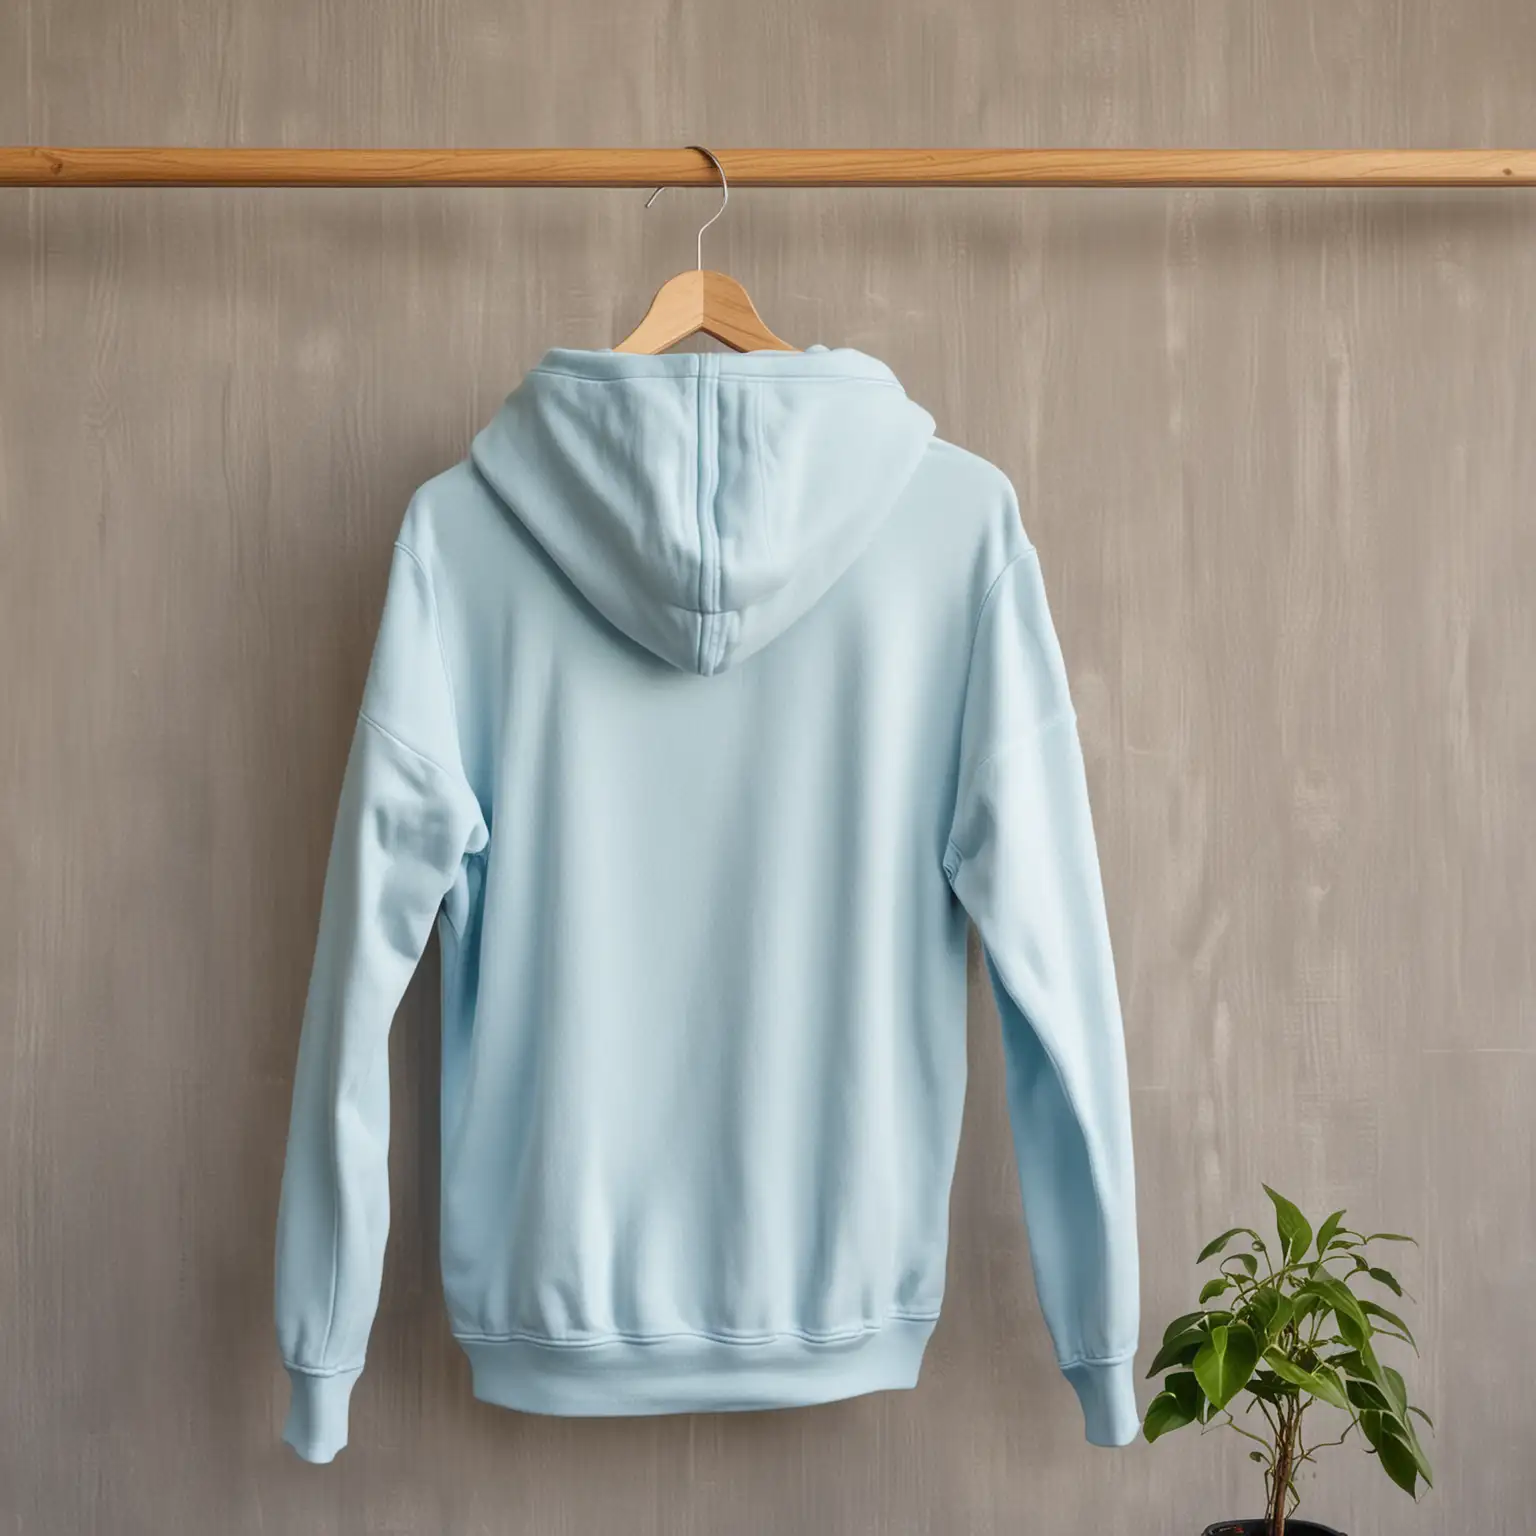 blank back of light blue hoodie on hanger, the hanger is hanging on a wooden pole with small plant in background